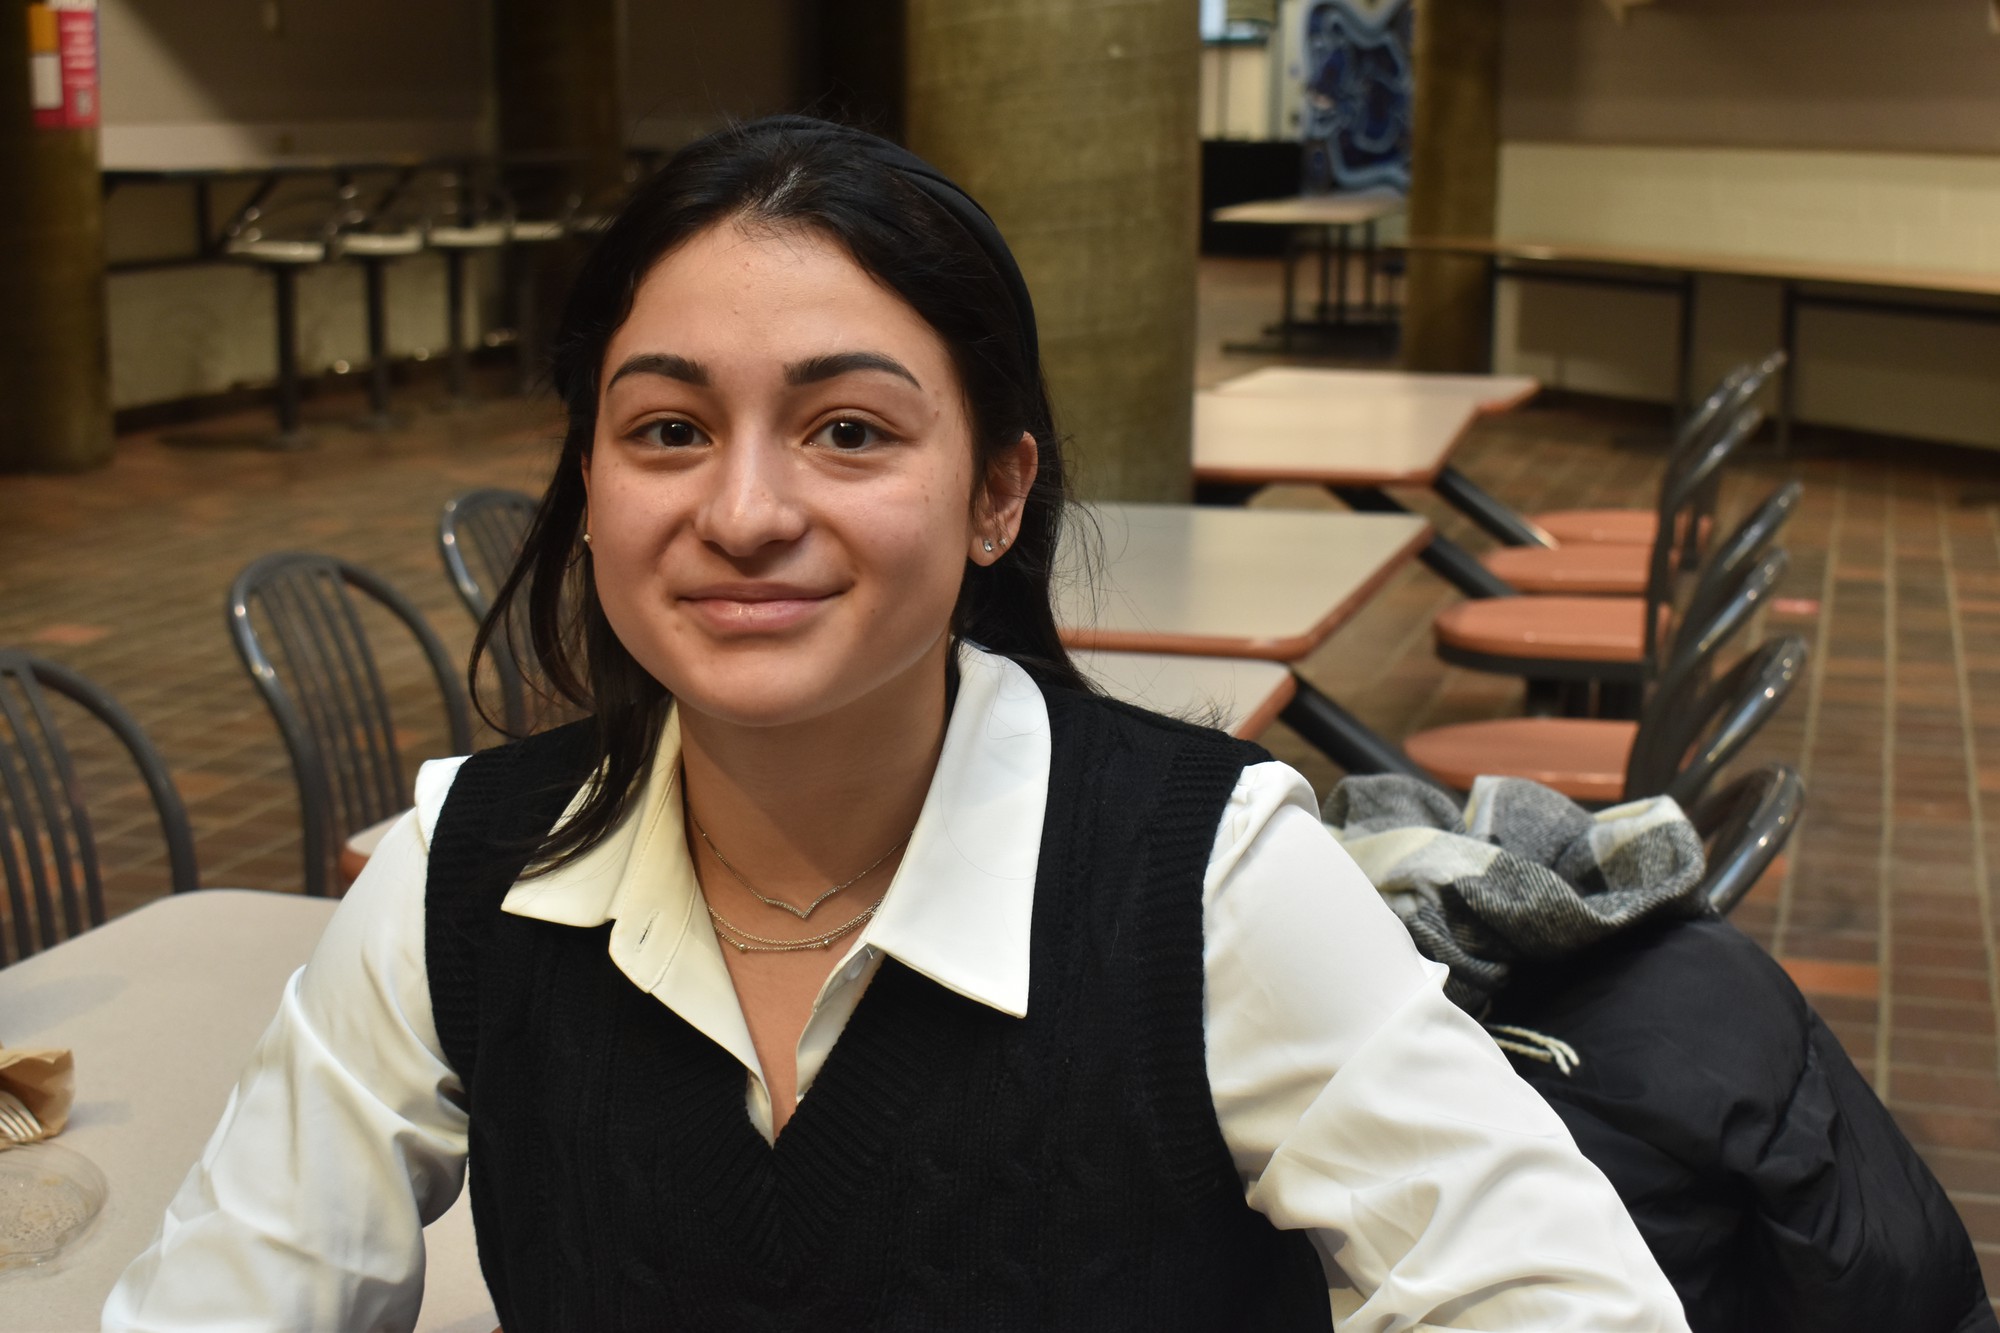 Gabby Sanabria, a management business student, offered an improvement suggestion for professors in 2023.